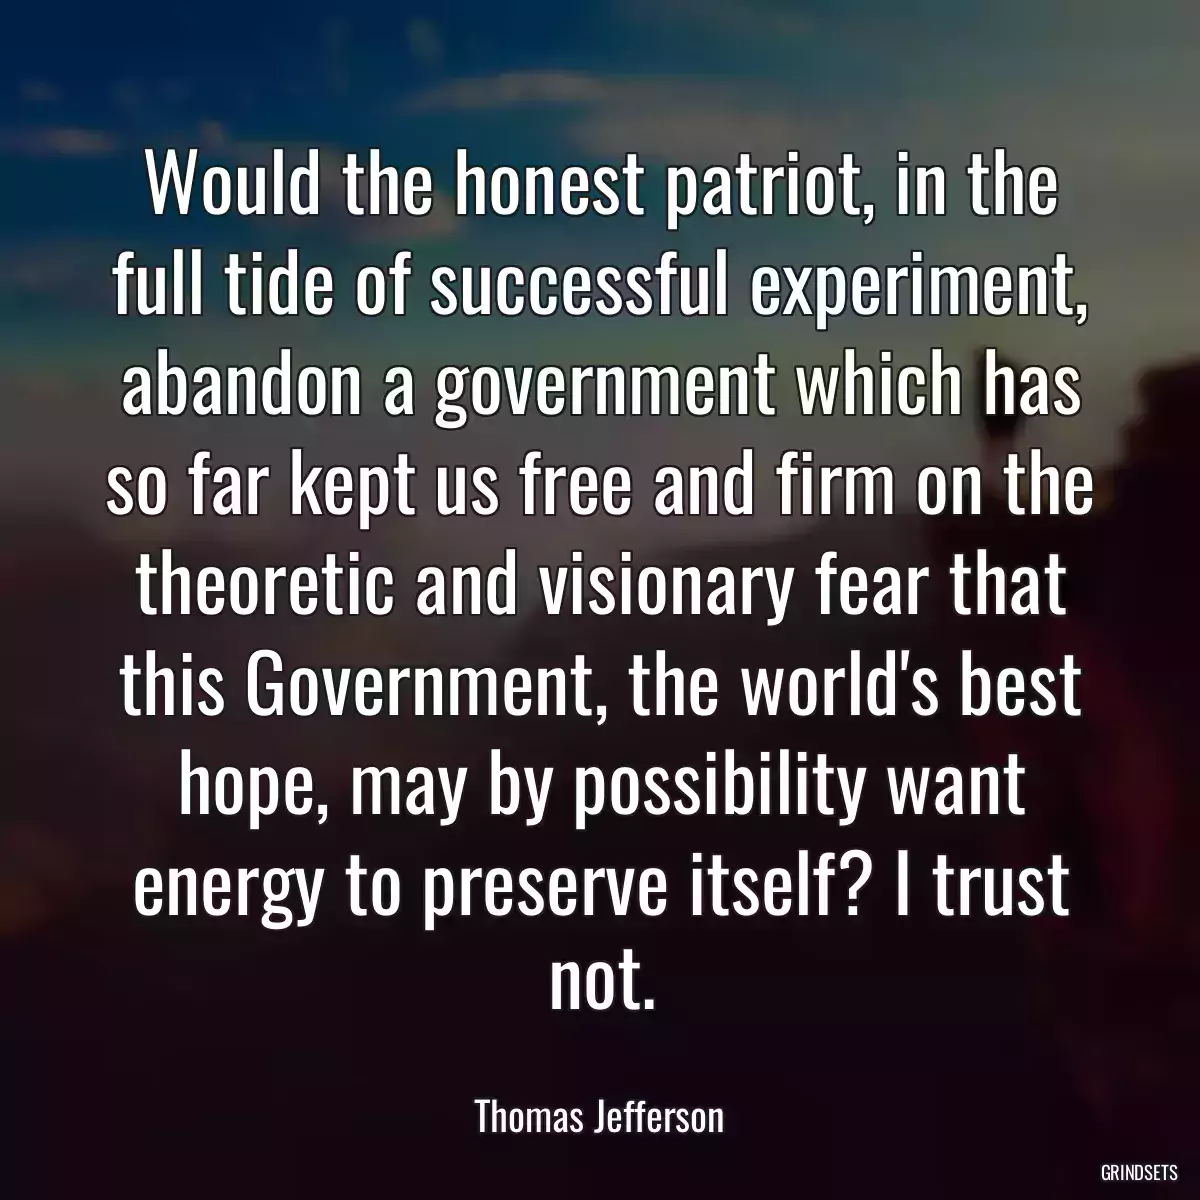 Would the honest patriot, in the full tide of successful experiment, abandon a government which has so far kept us free and firm on the theoretic and visionary fear that this Government, the world\'s best hope, may by possibility want energy to preserve itself? I trust not.